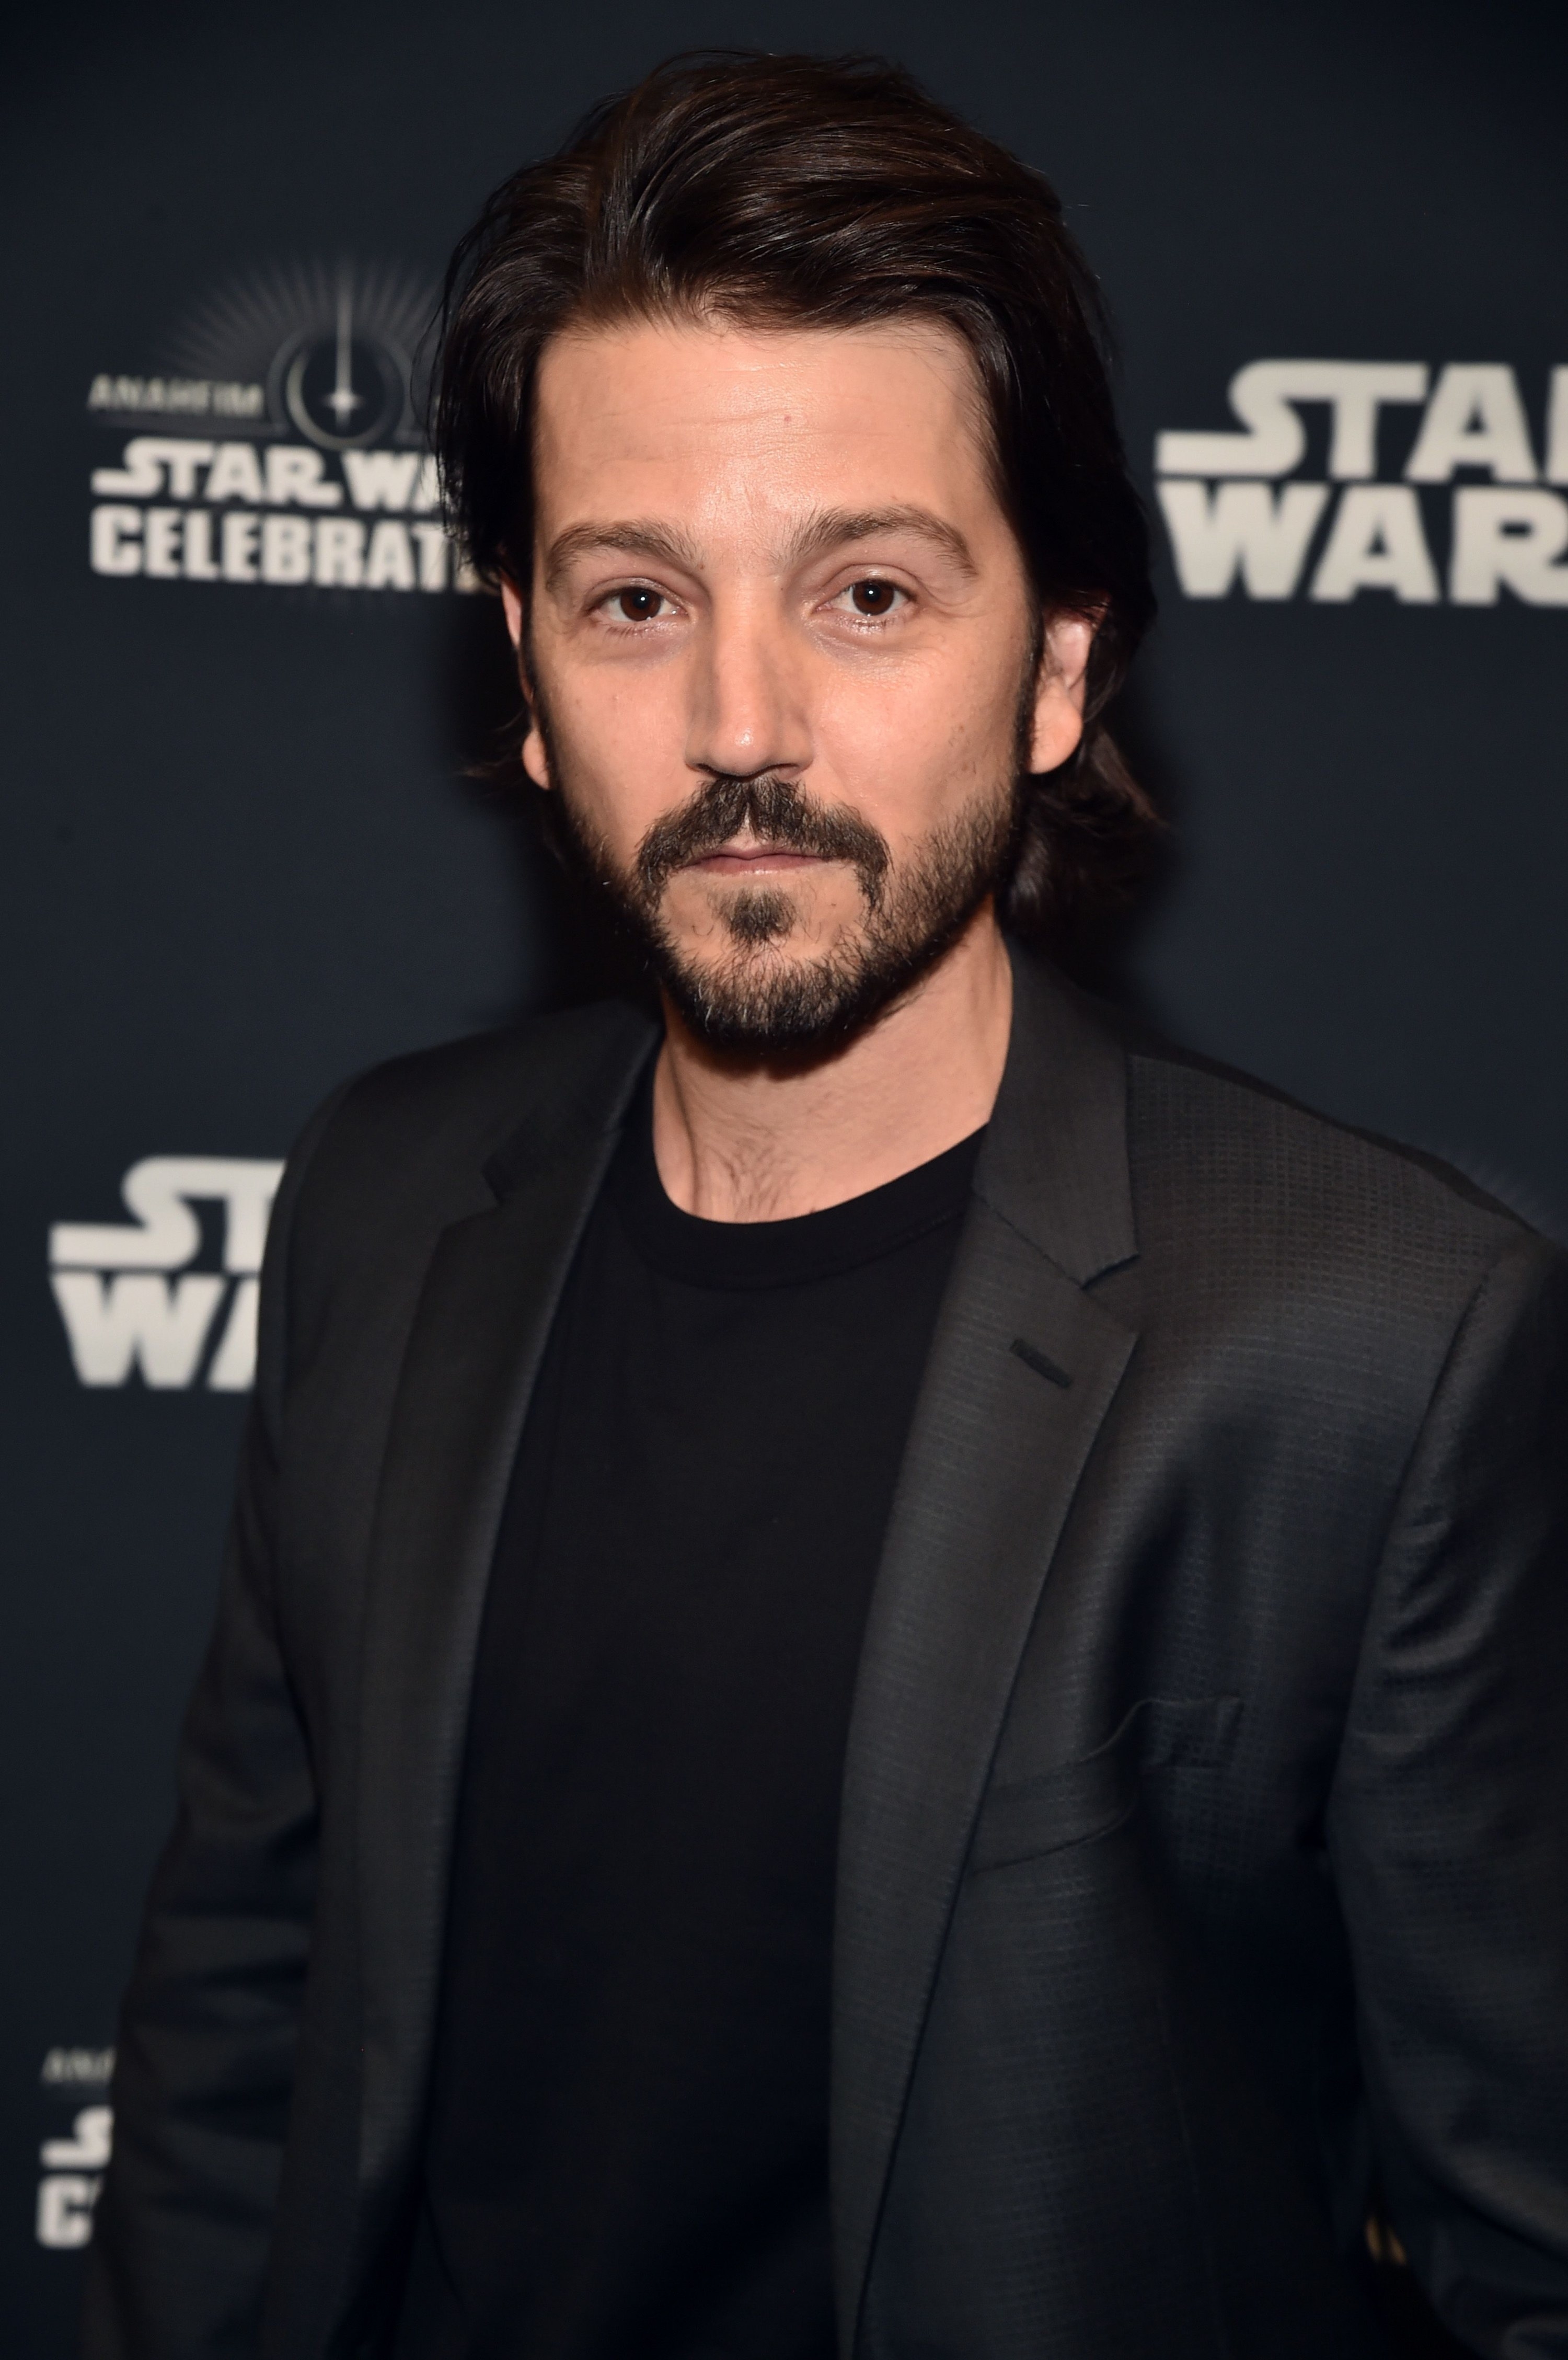 Diego Luna on the red carpet